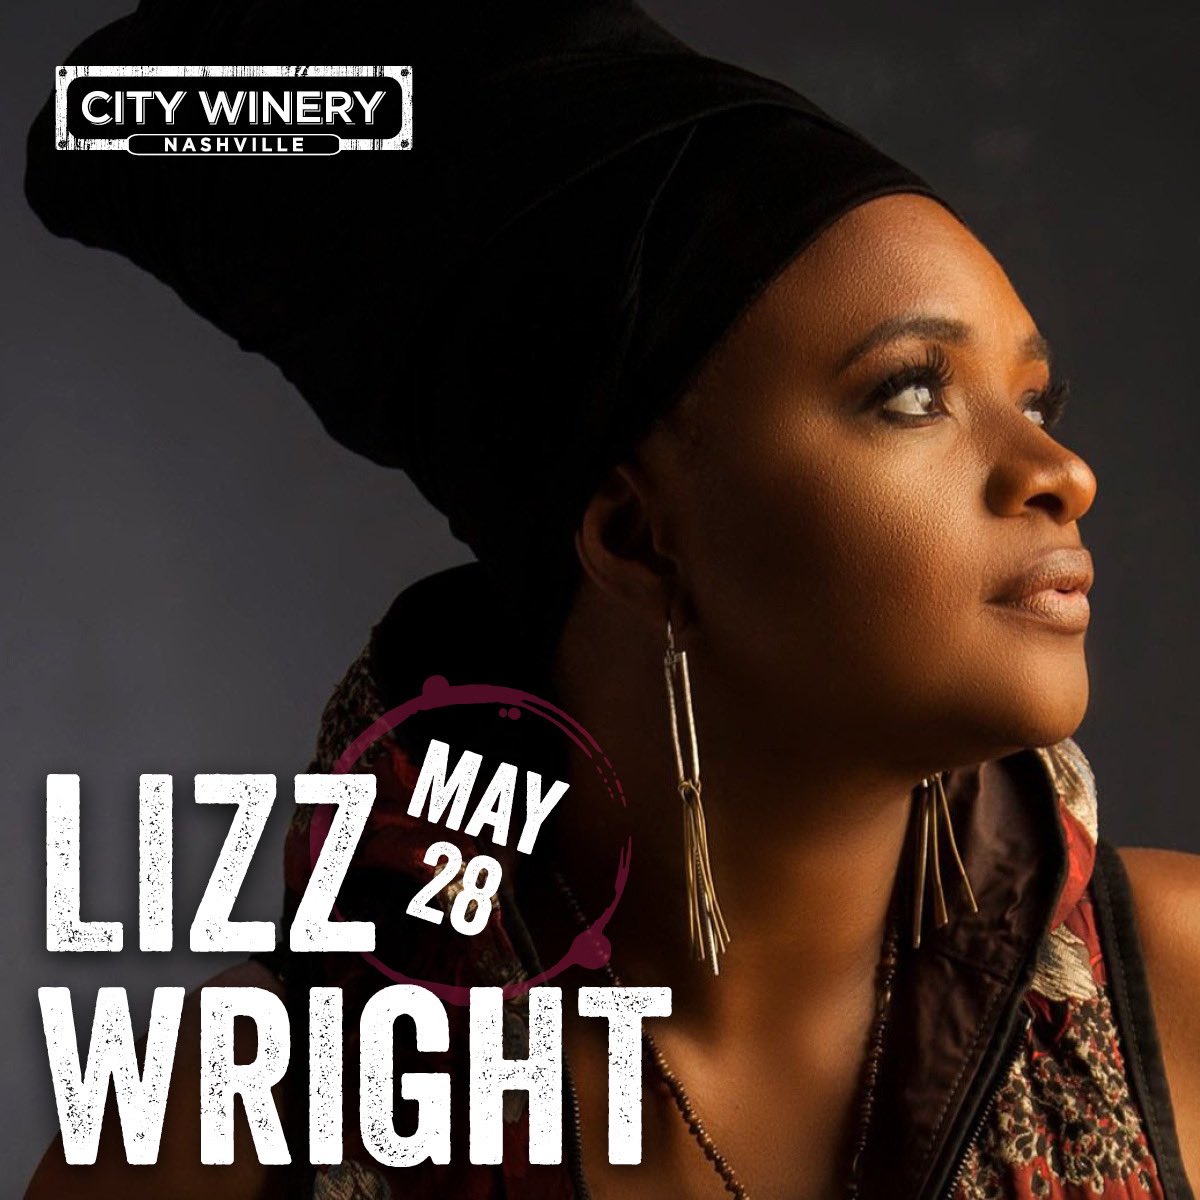 Nashville! We’ll see you real soon at @CityWineryNSH on May 28. Tickets available at lizzwright.net/tour 🎶